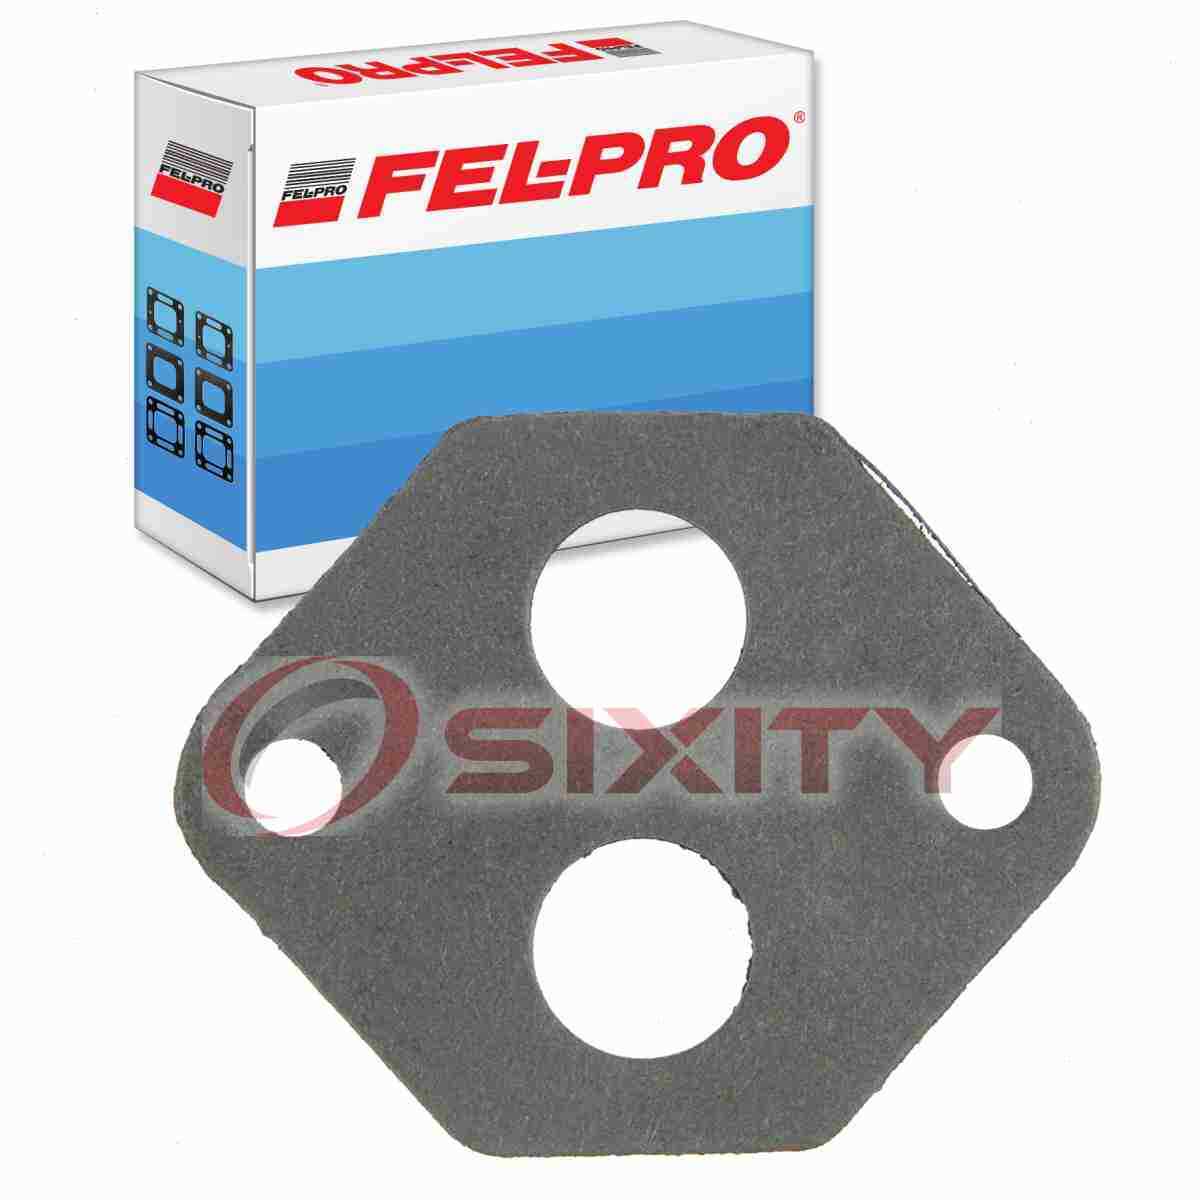 Fel-Pro Fuel Injection Throttle Body Mounting Gasket for 1999-2000 Panoz AIV rp